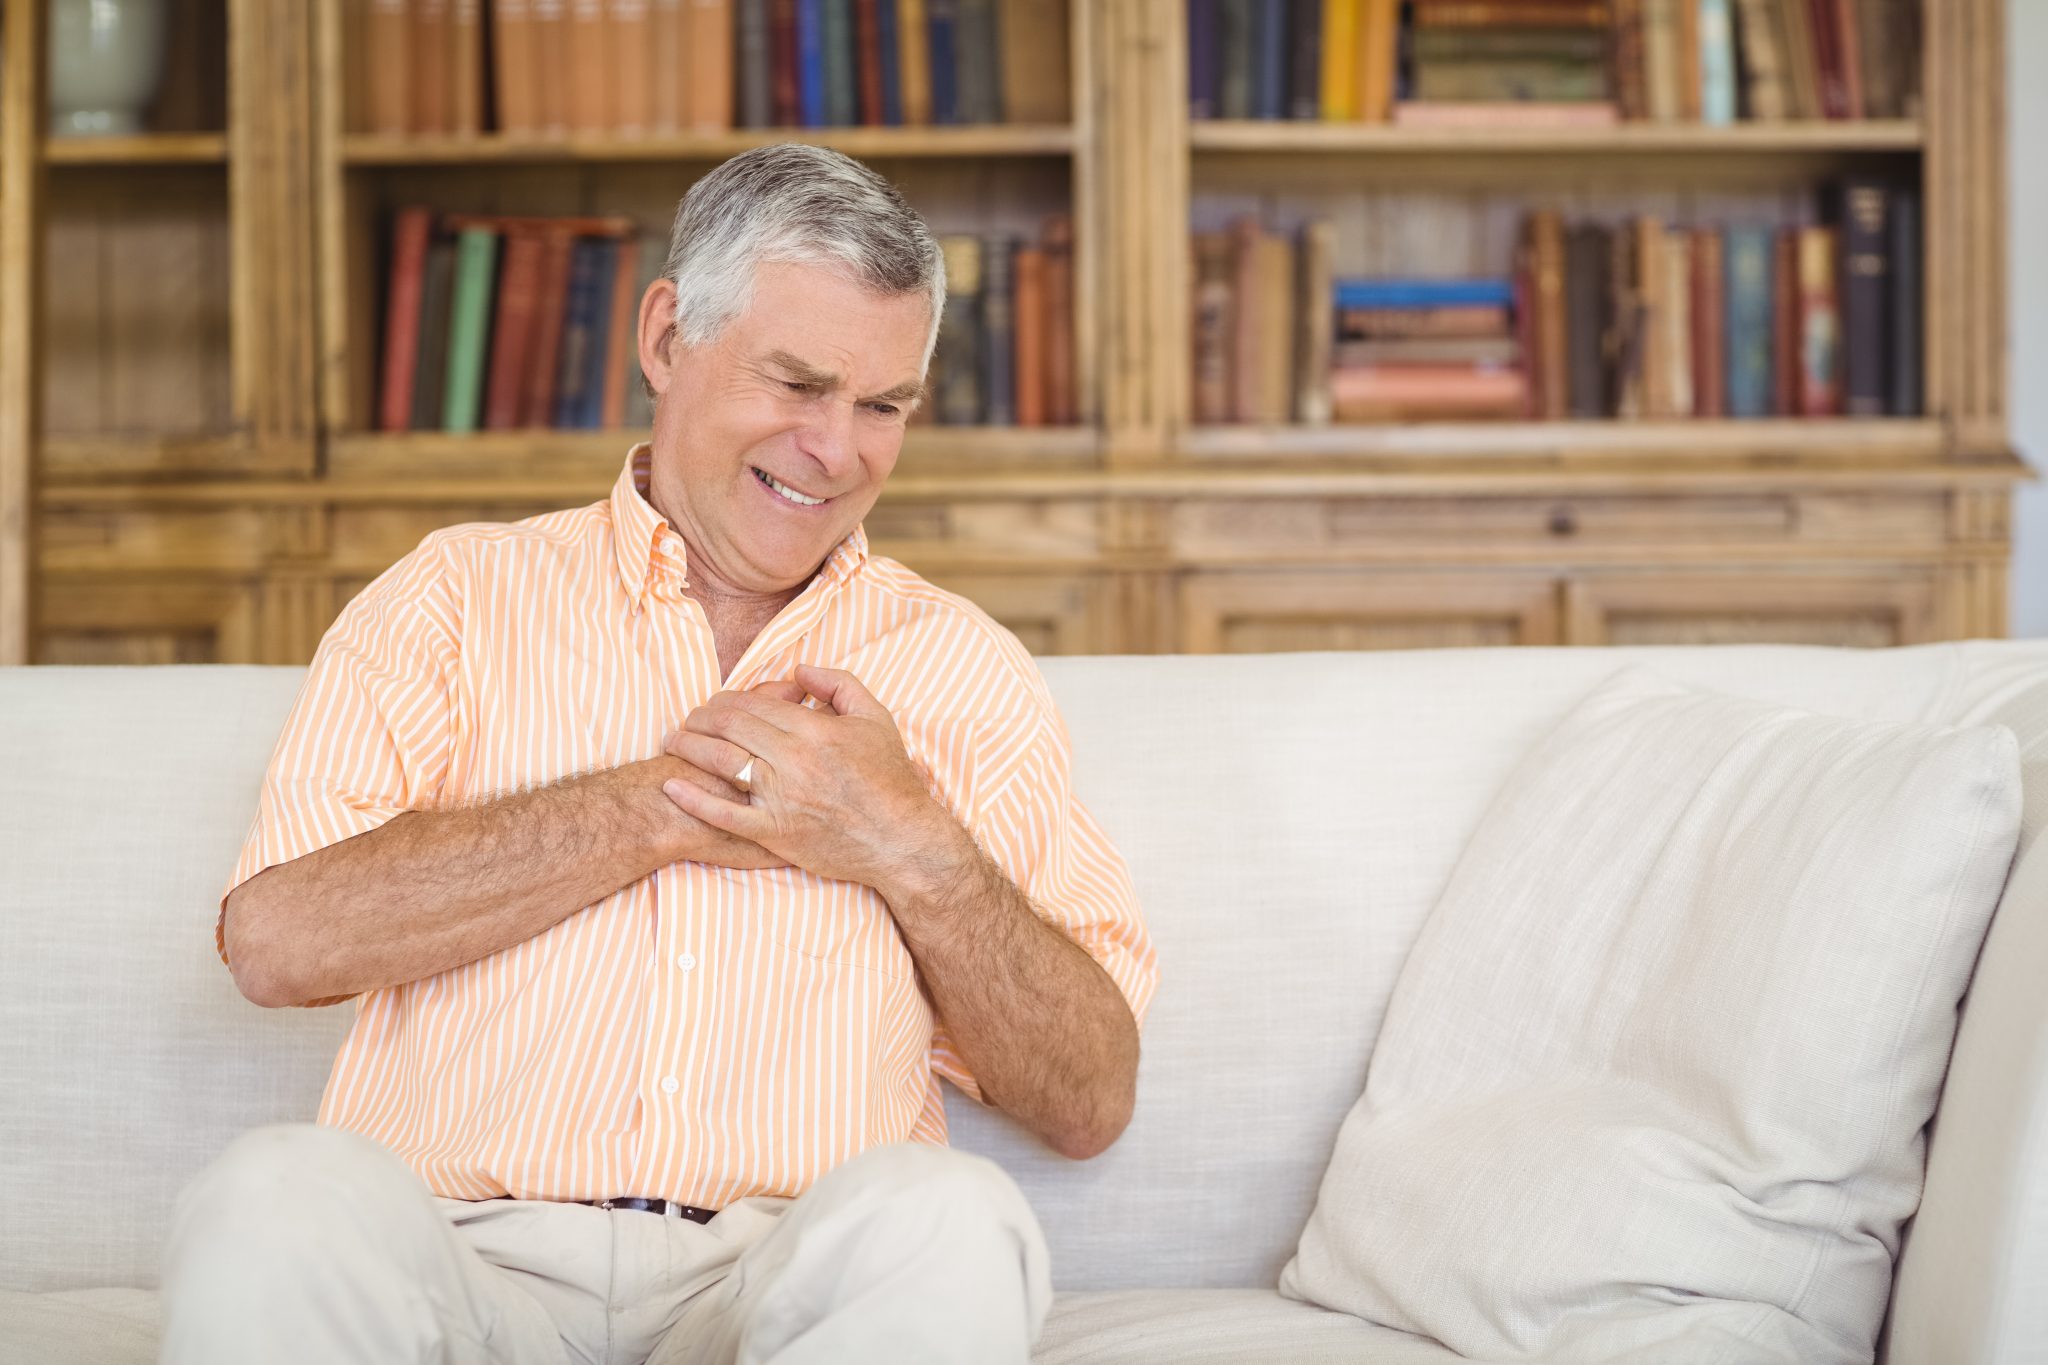 Signs of A Heart Attack: What To Watch Out For